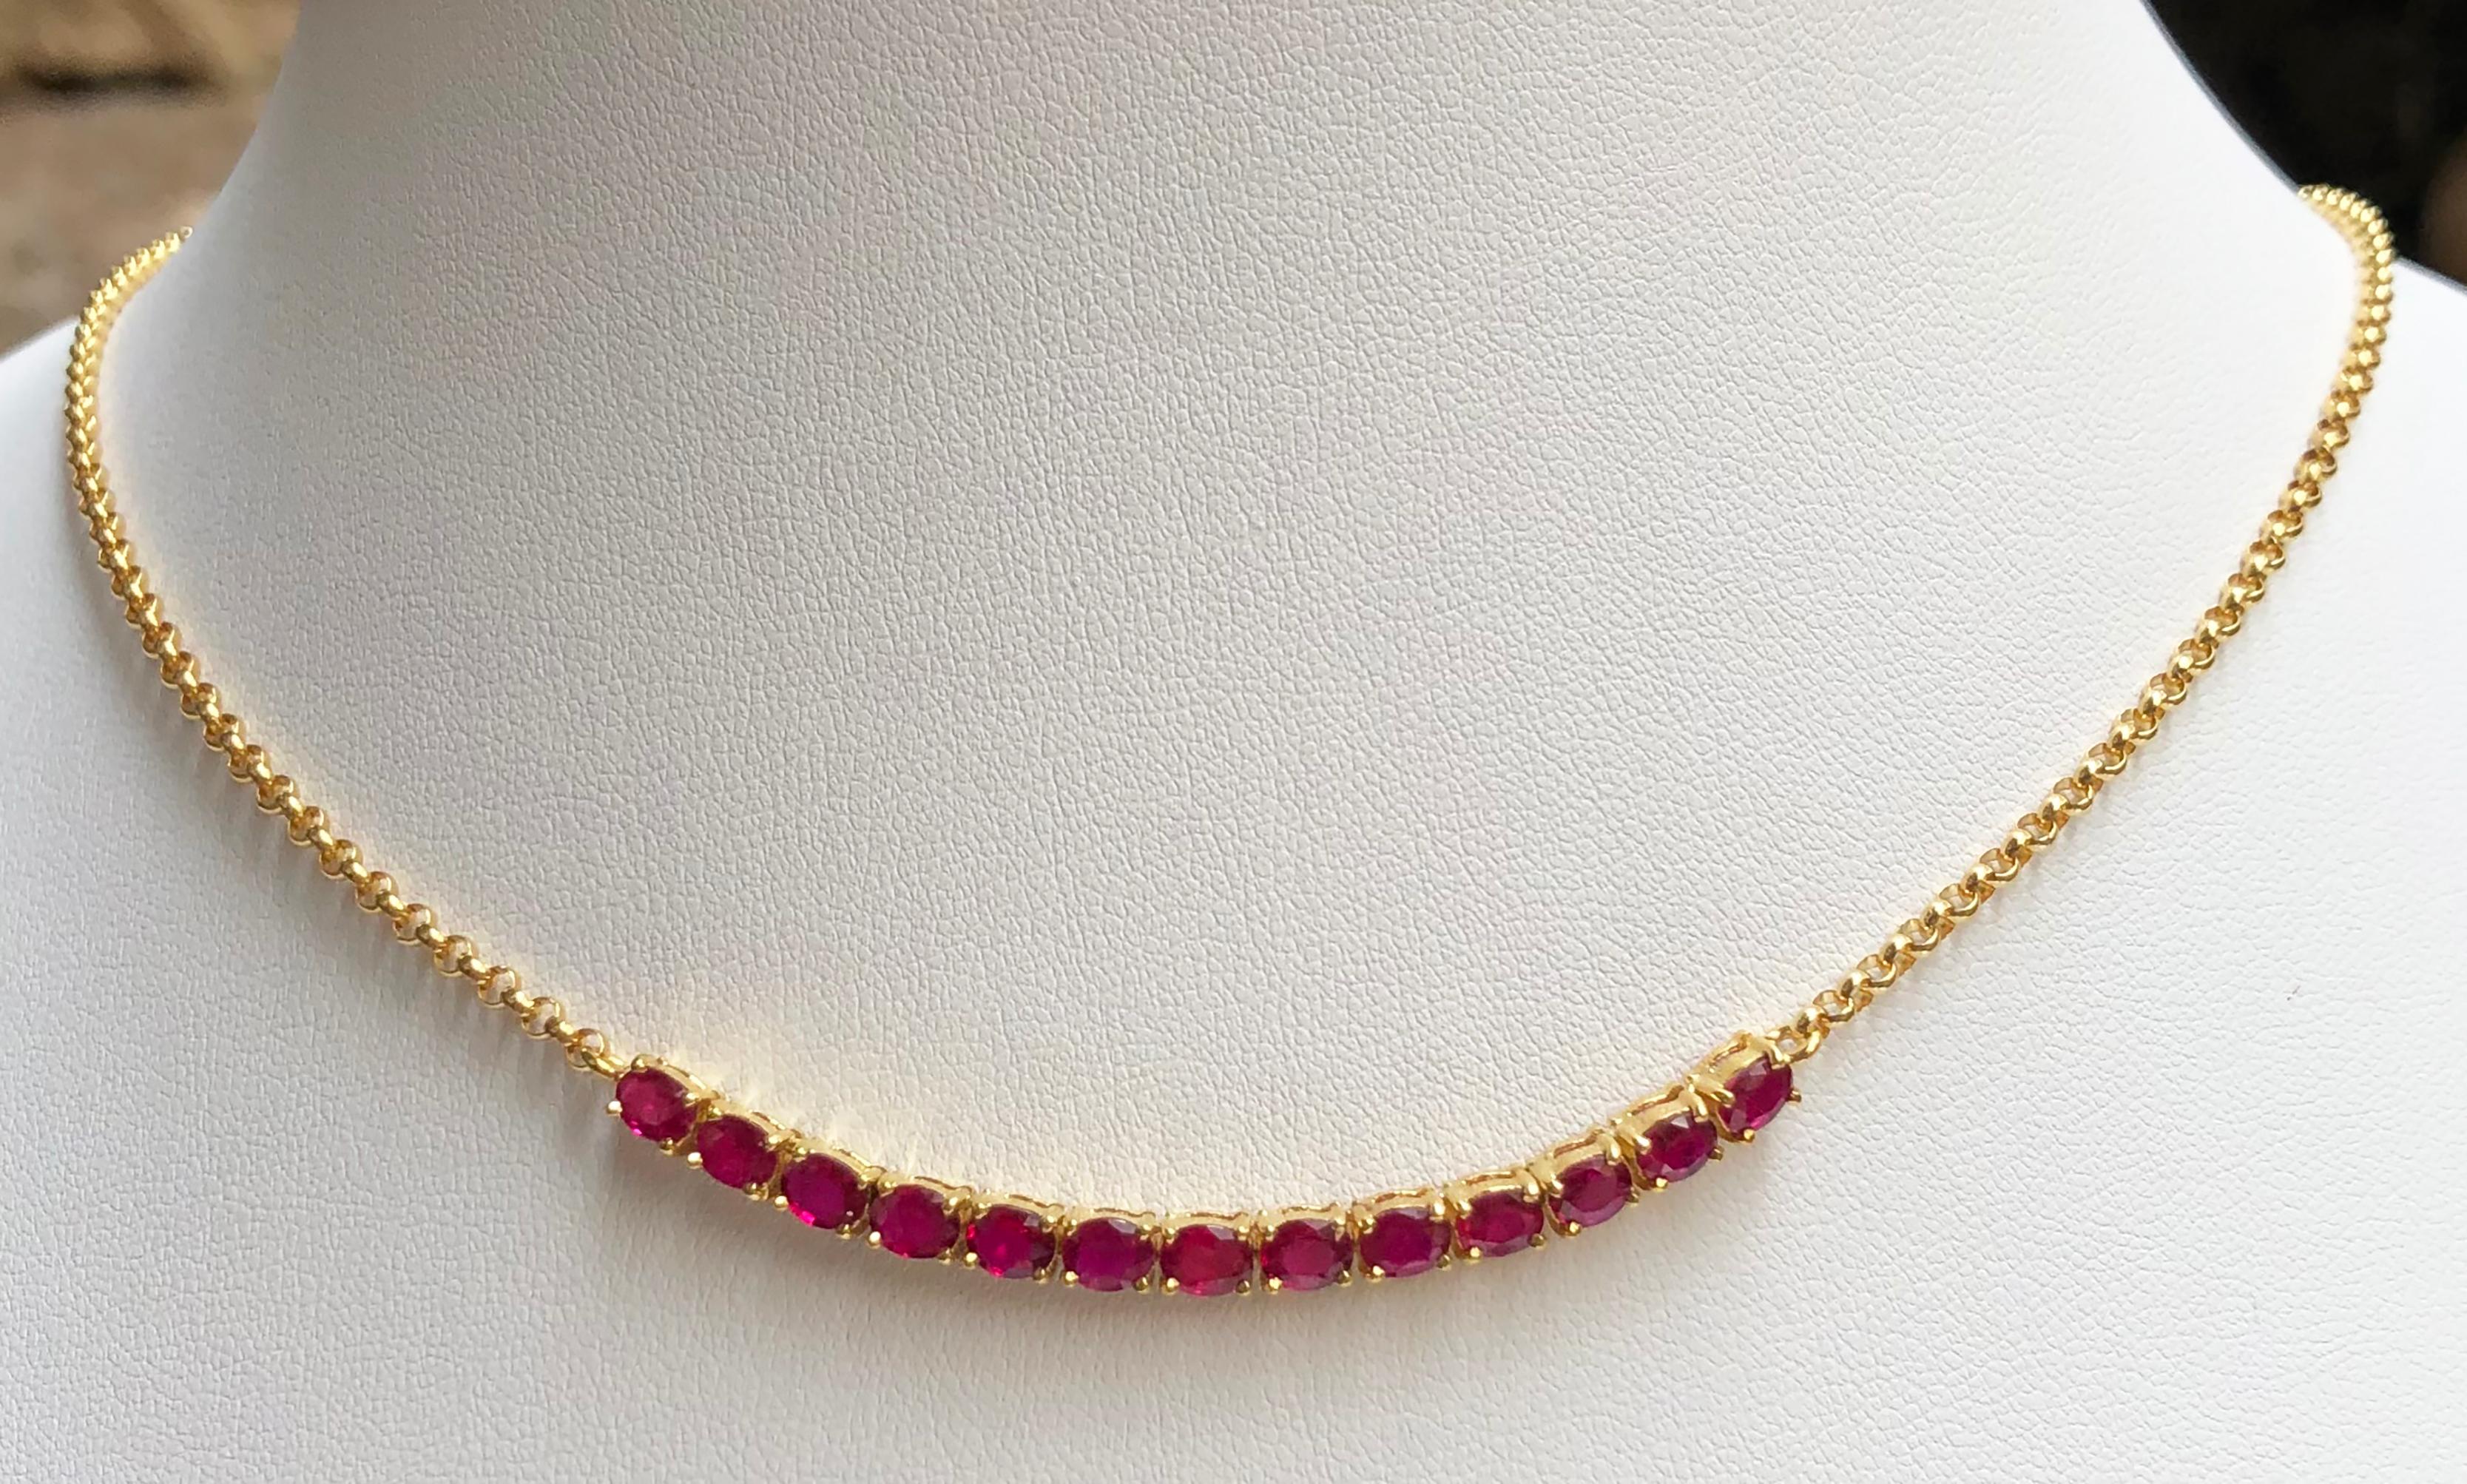 Ruby 3.60 carats Necklace set in 18 Karat Gold Settings

Width:  6.0 cm 
Length: 46.0 cm
Total Weight: 10.29 grams

